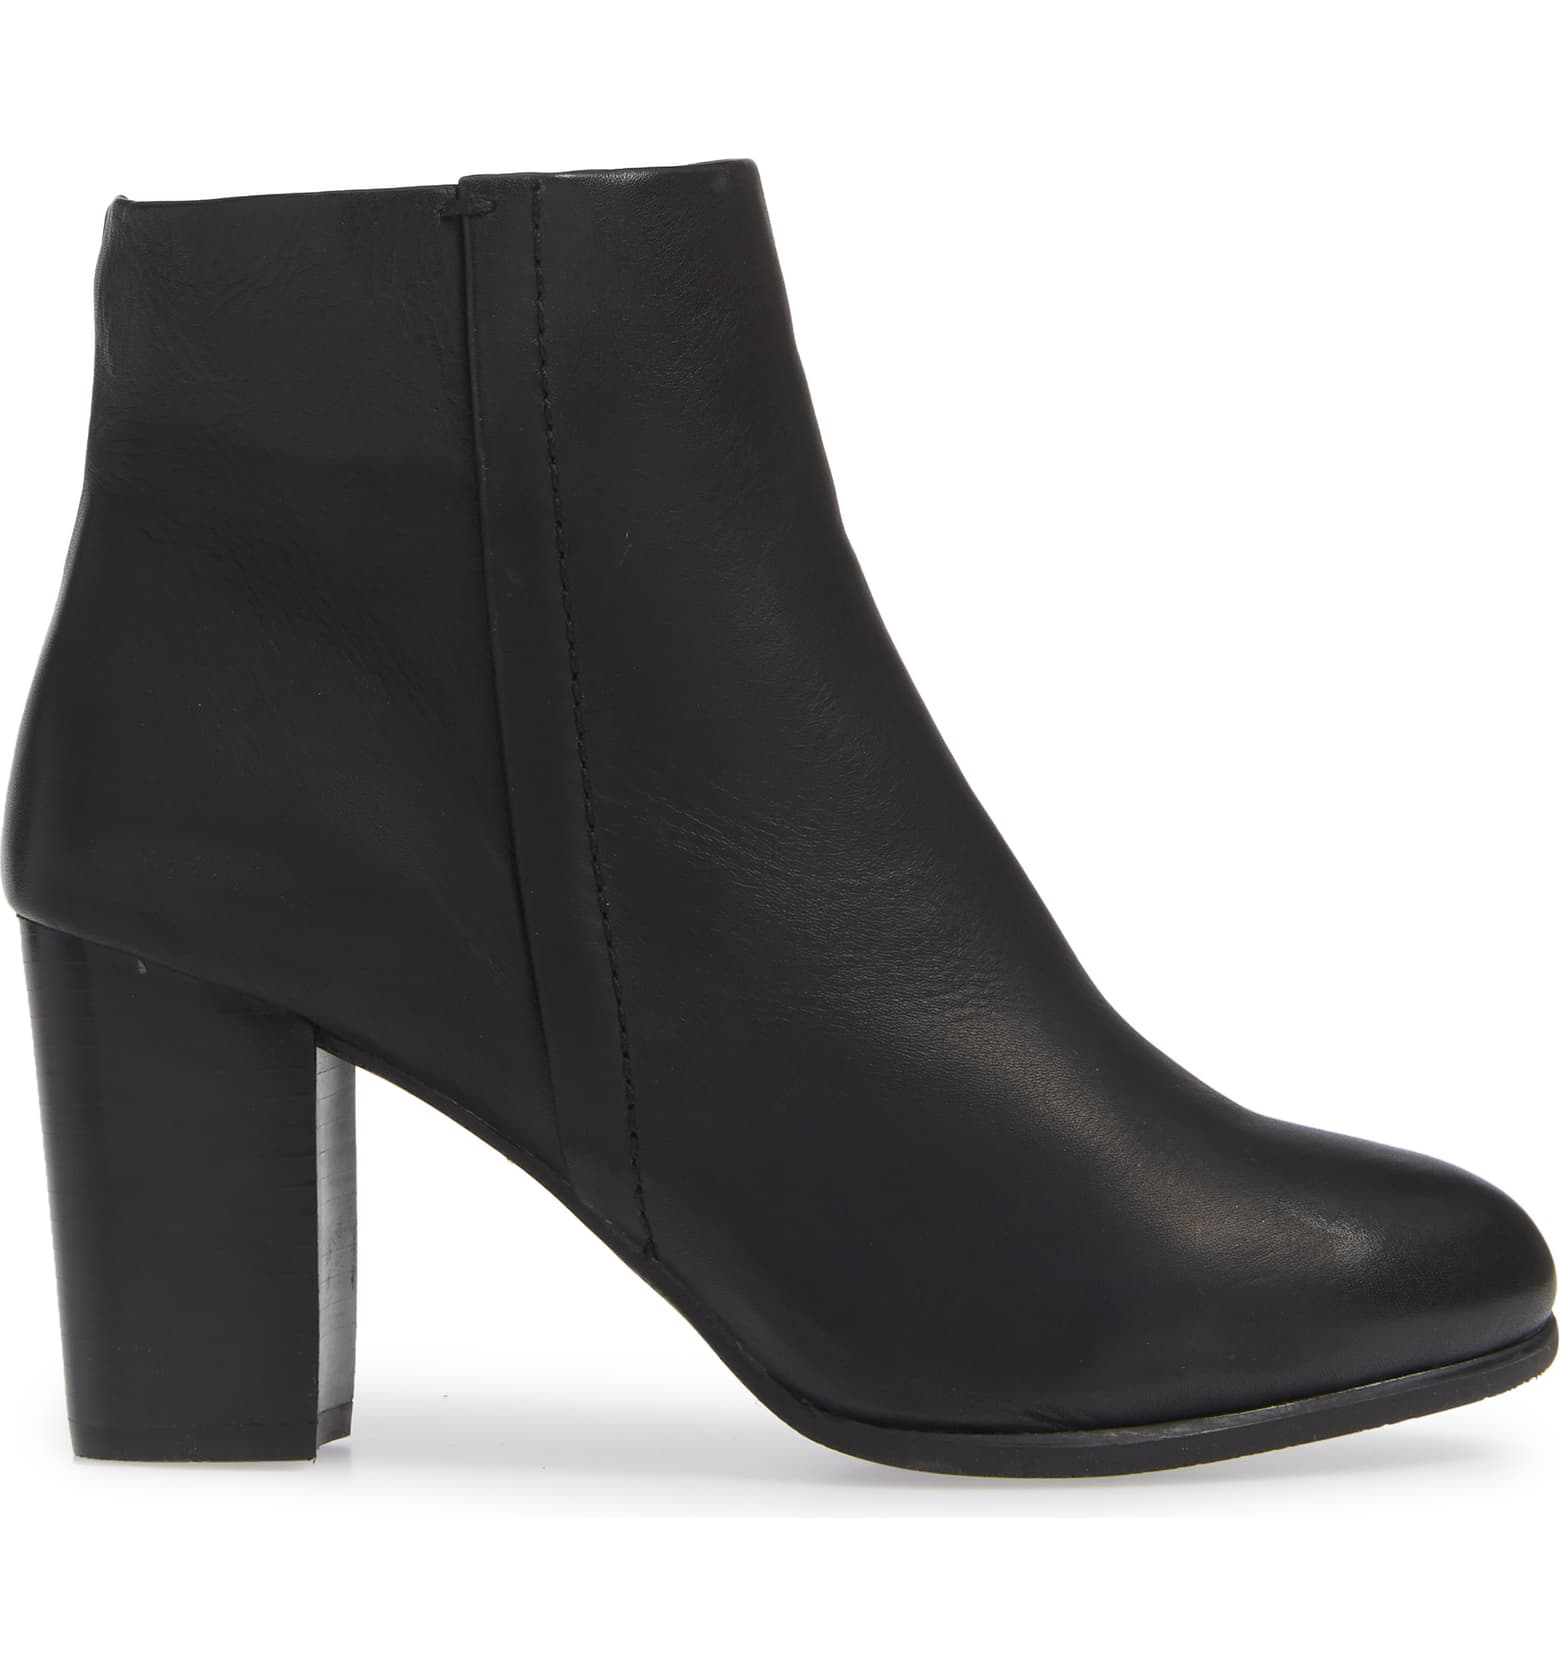 VIONIC PERK KENNEDY ANKLE BOOT – The 